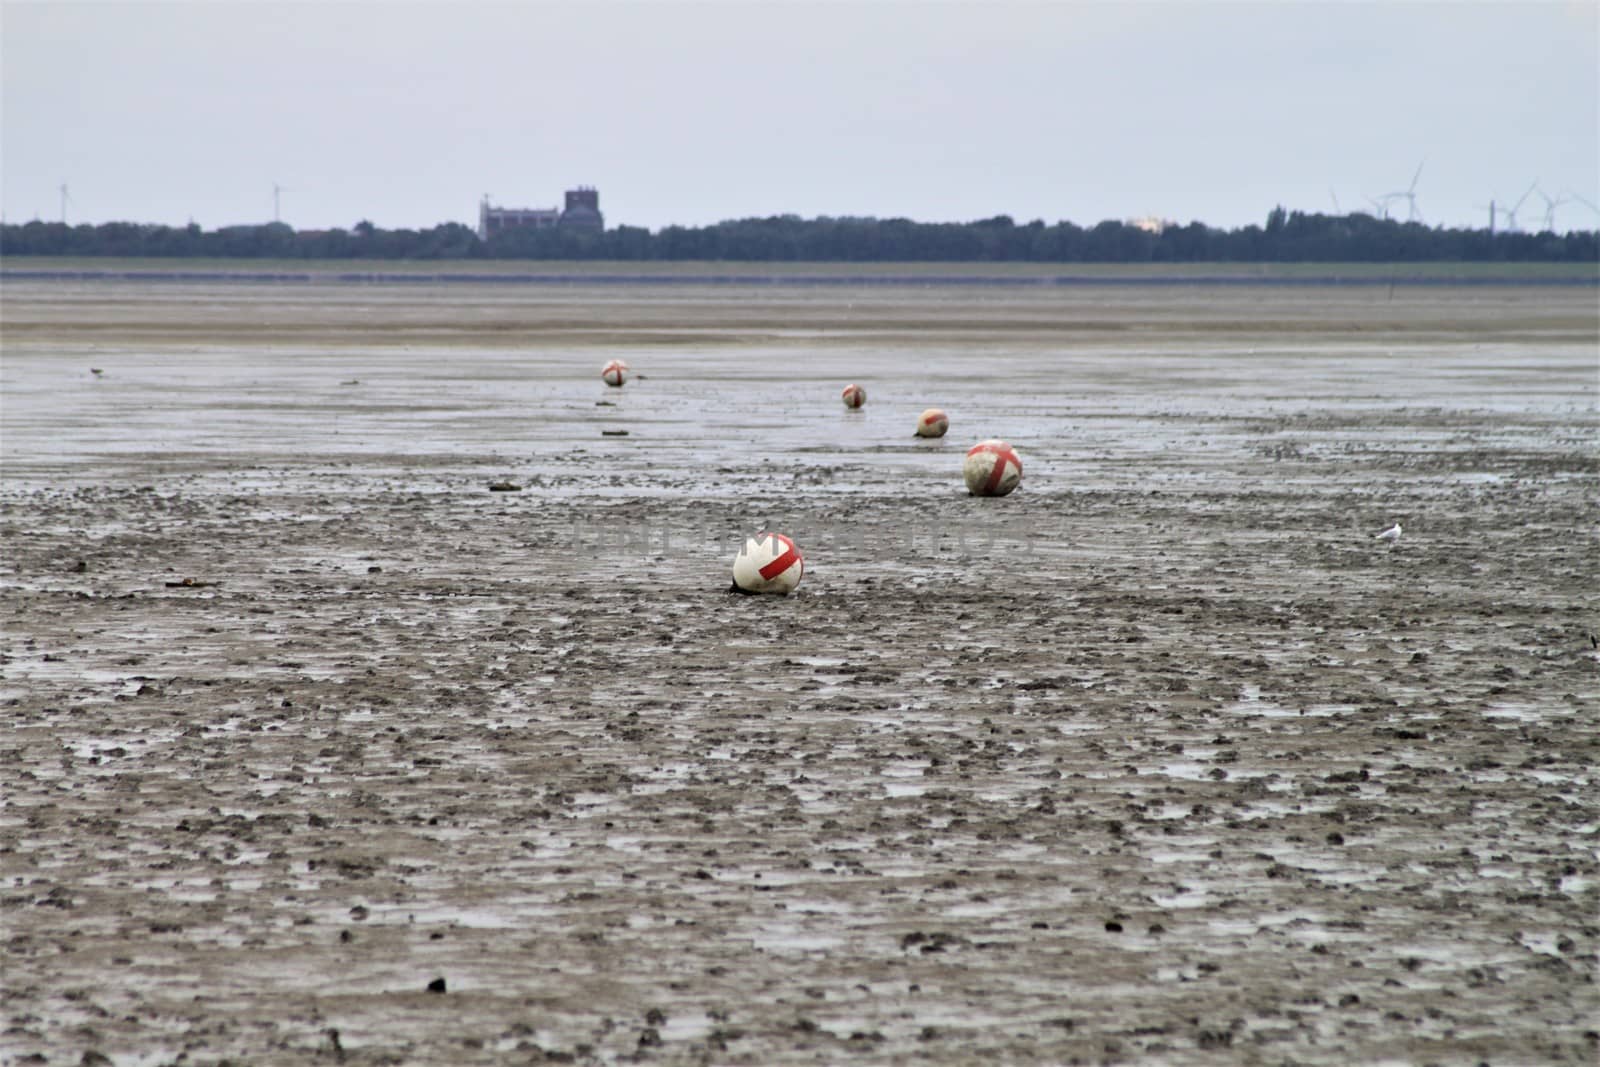 Watt landscape with buoys at low tide in northern Germany